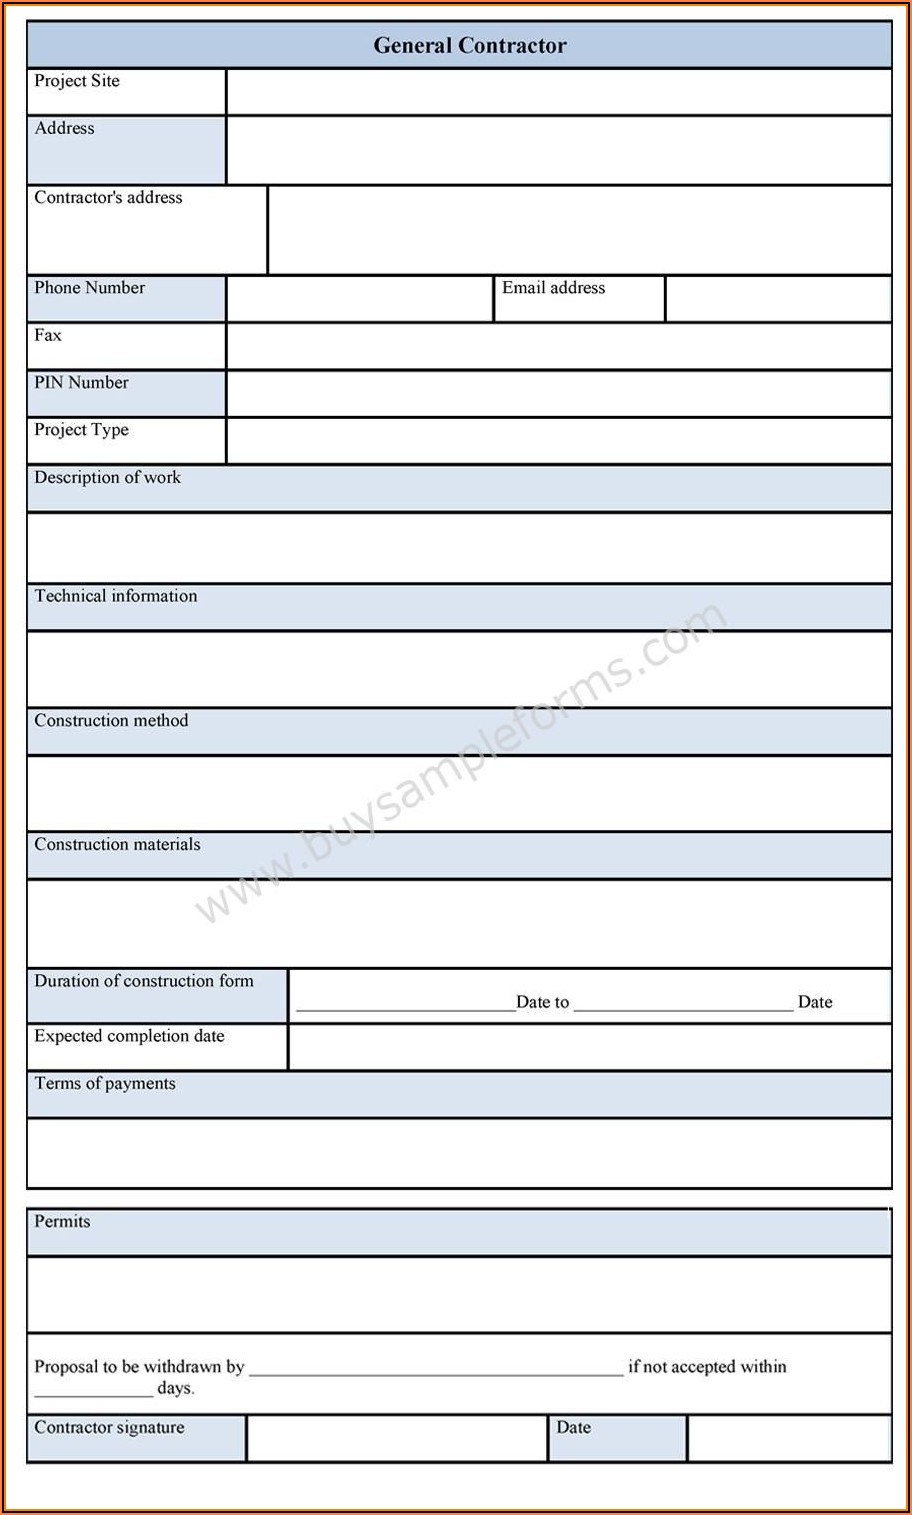 General Contractor Forms Templates